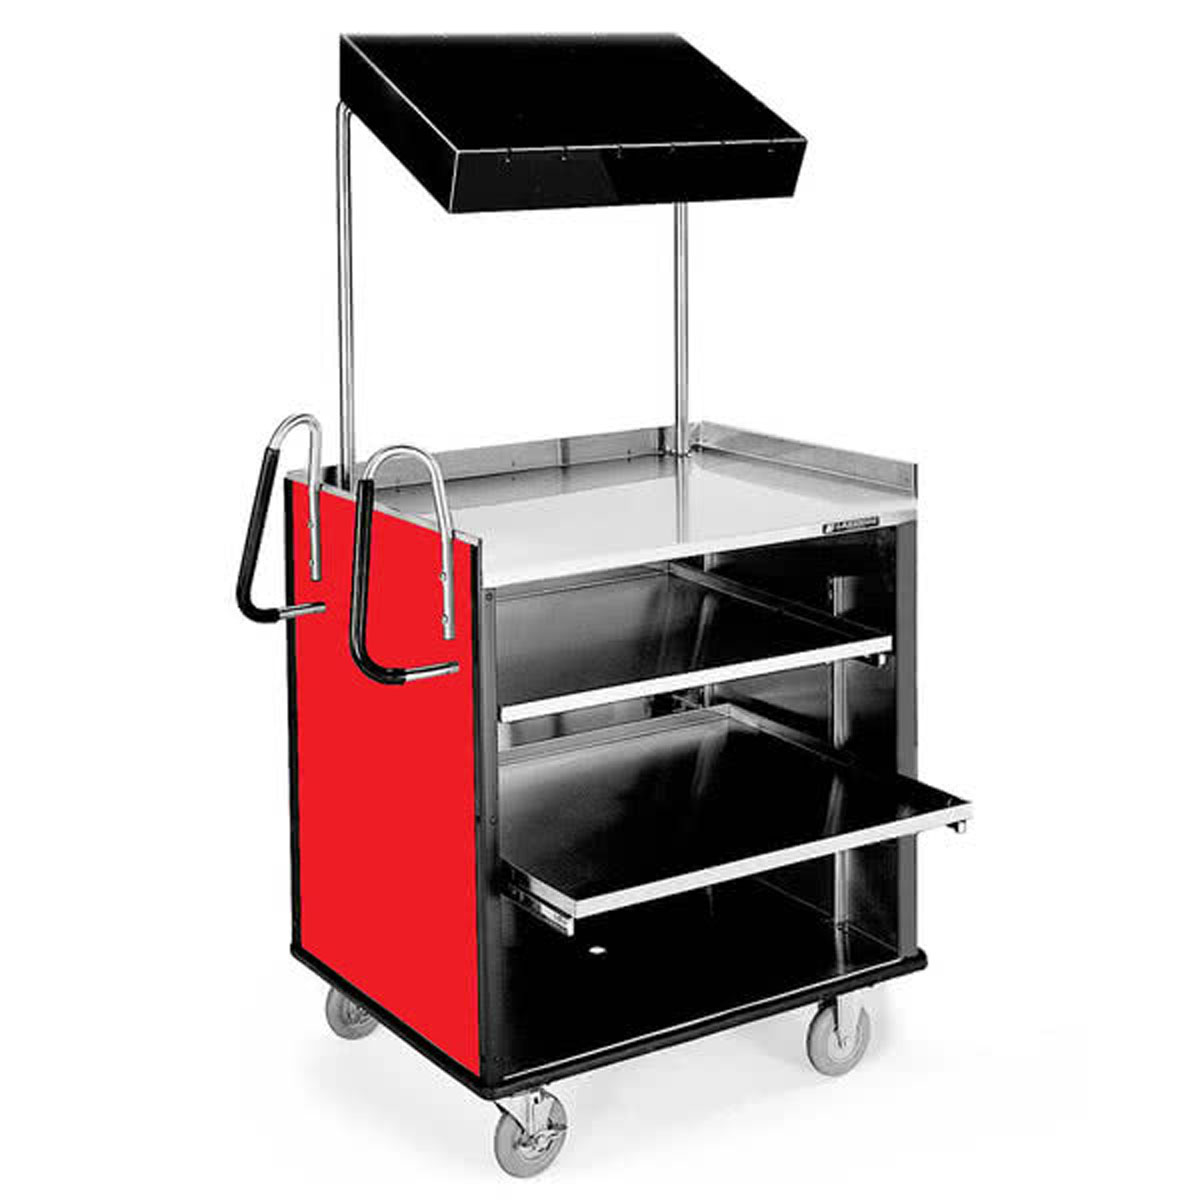 Lakeside LA660R Stainless Steel Compact Mart Cart Red Laminate Finish